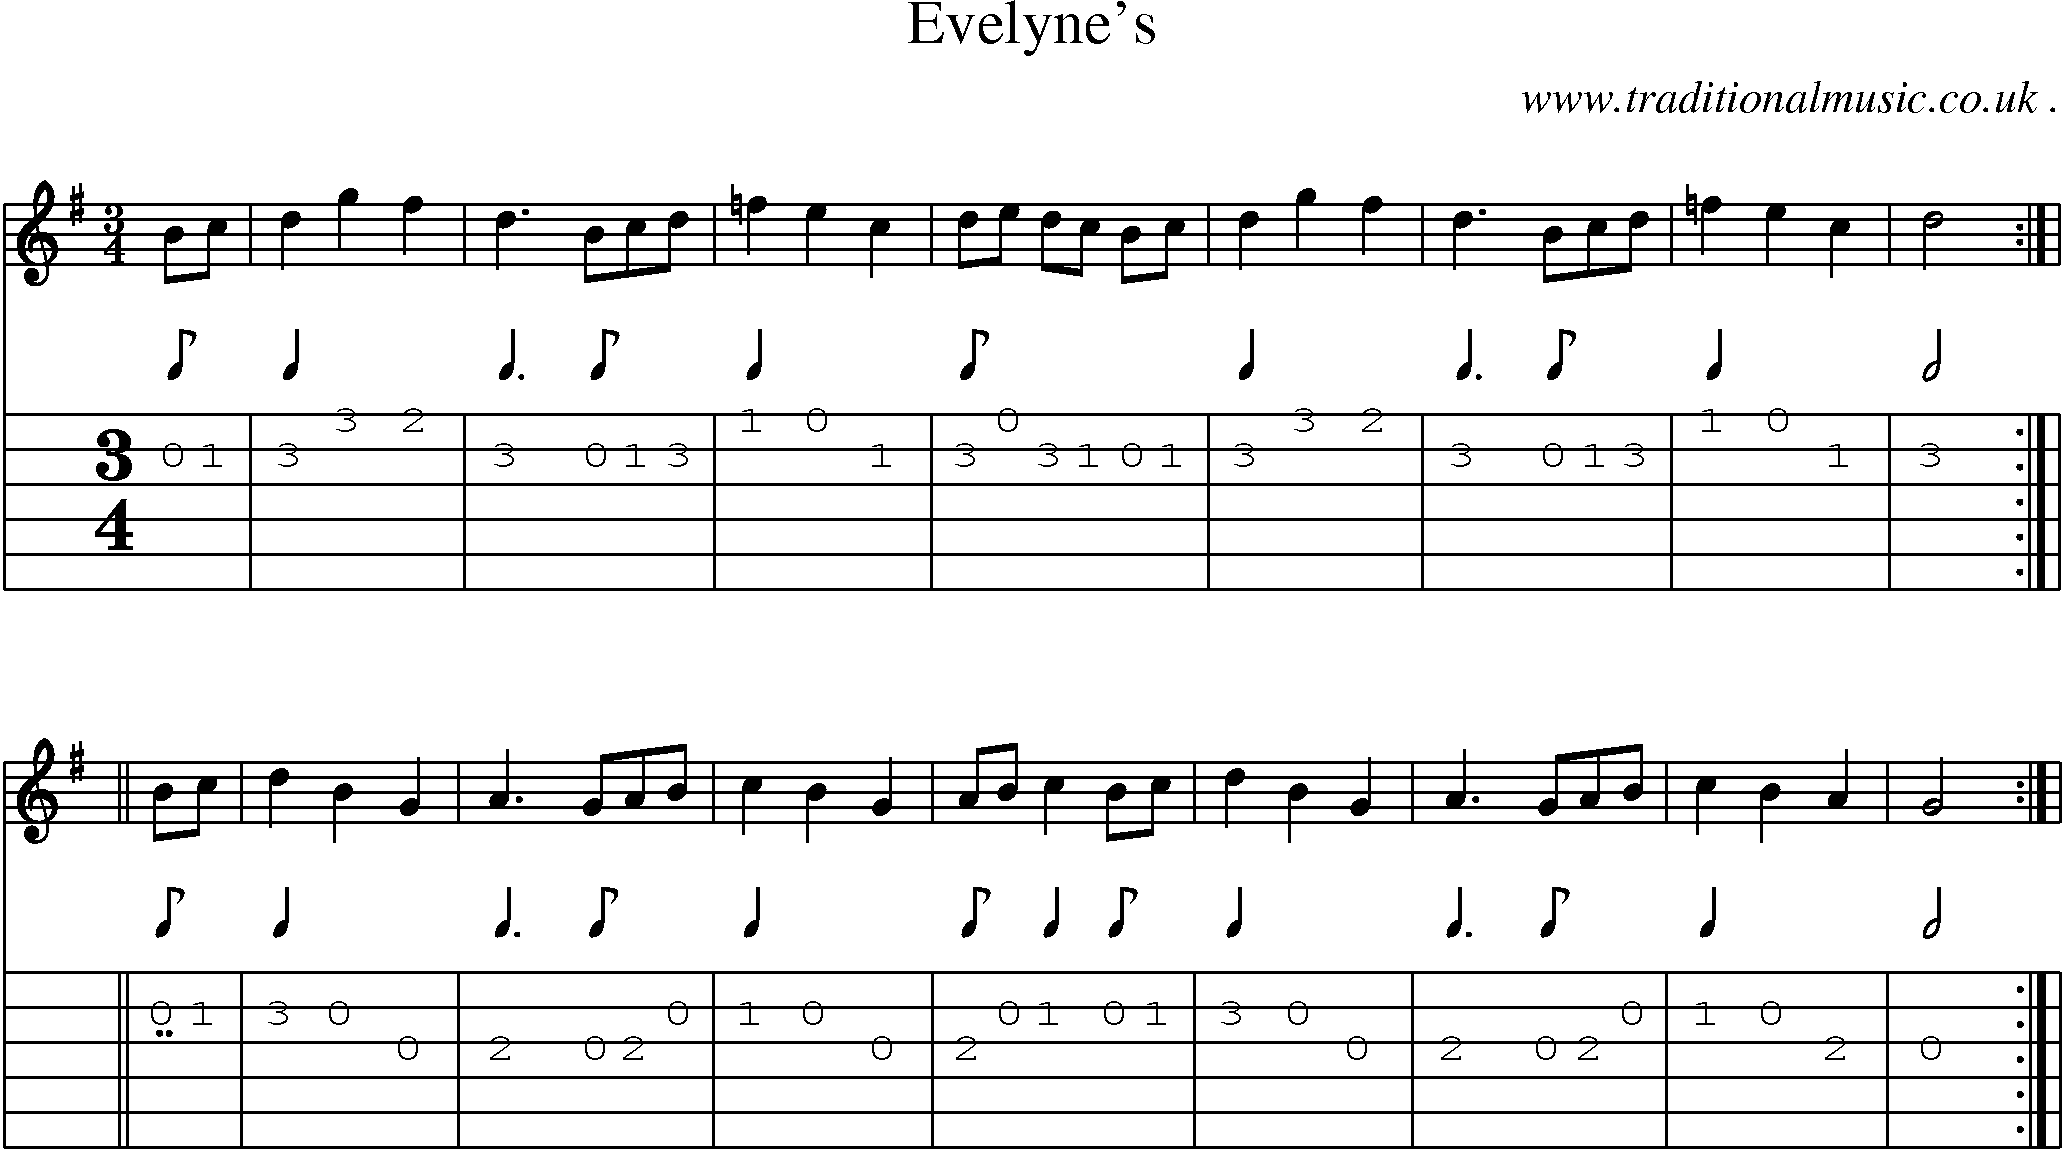 Sheet-Music and Guitar Tabs for Evelynes